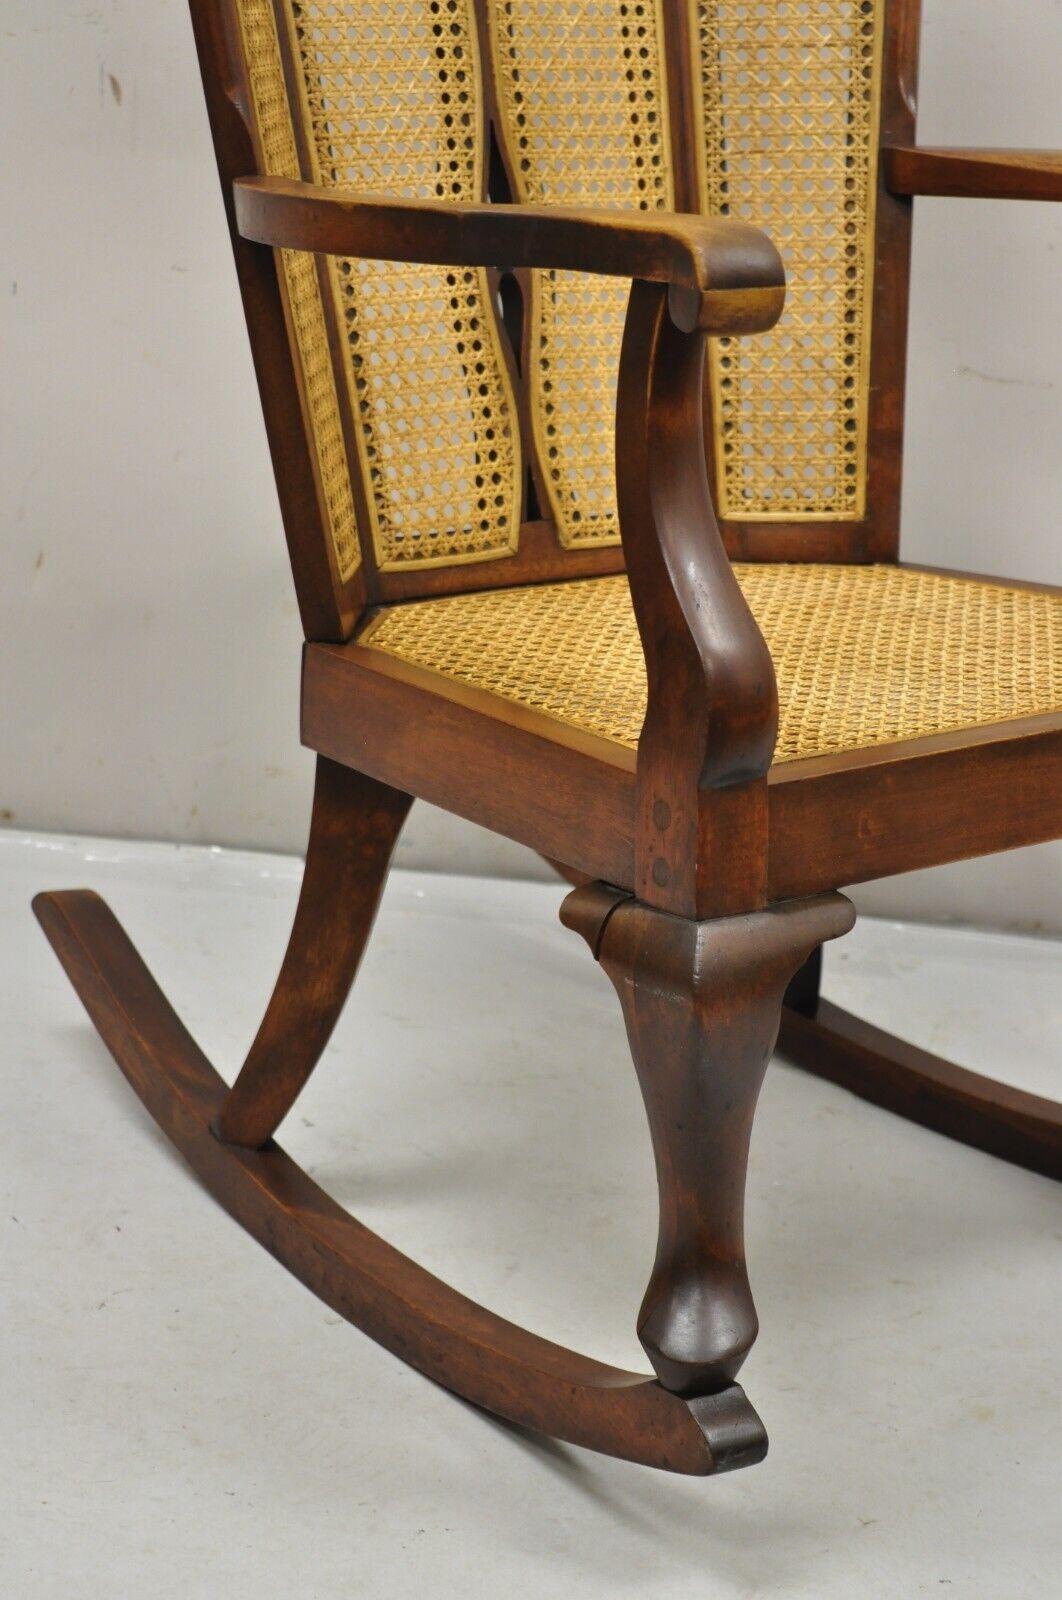 vintage rocking chairs 1900's